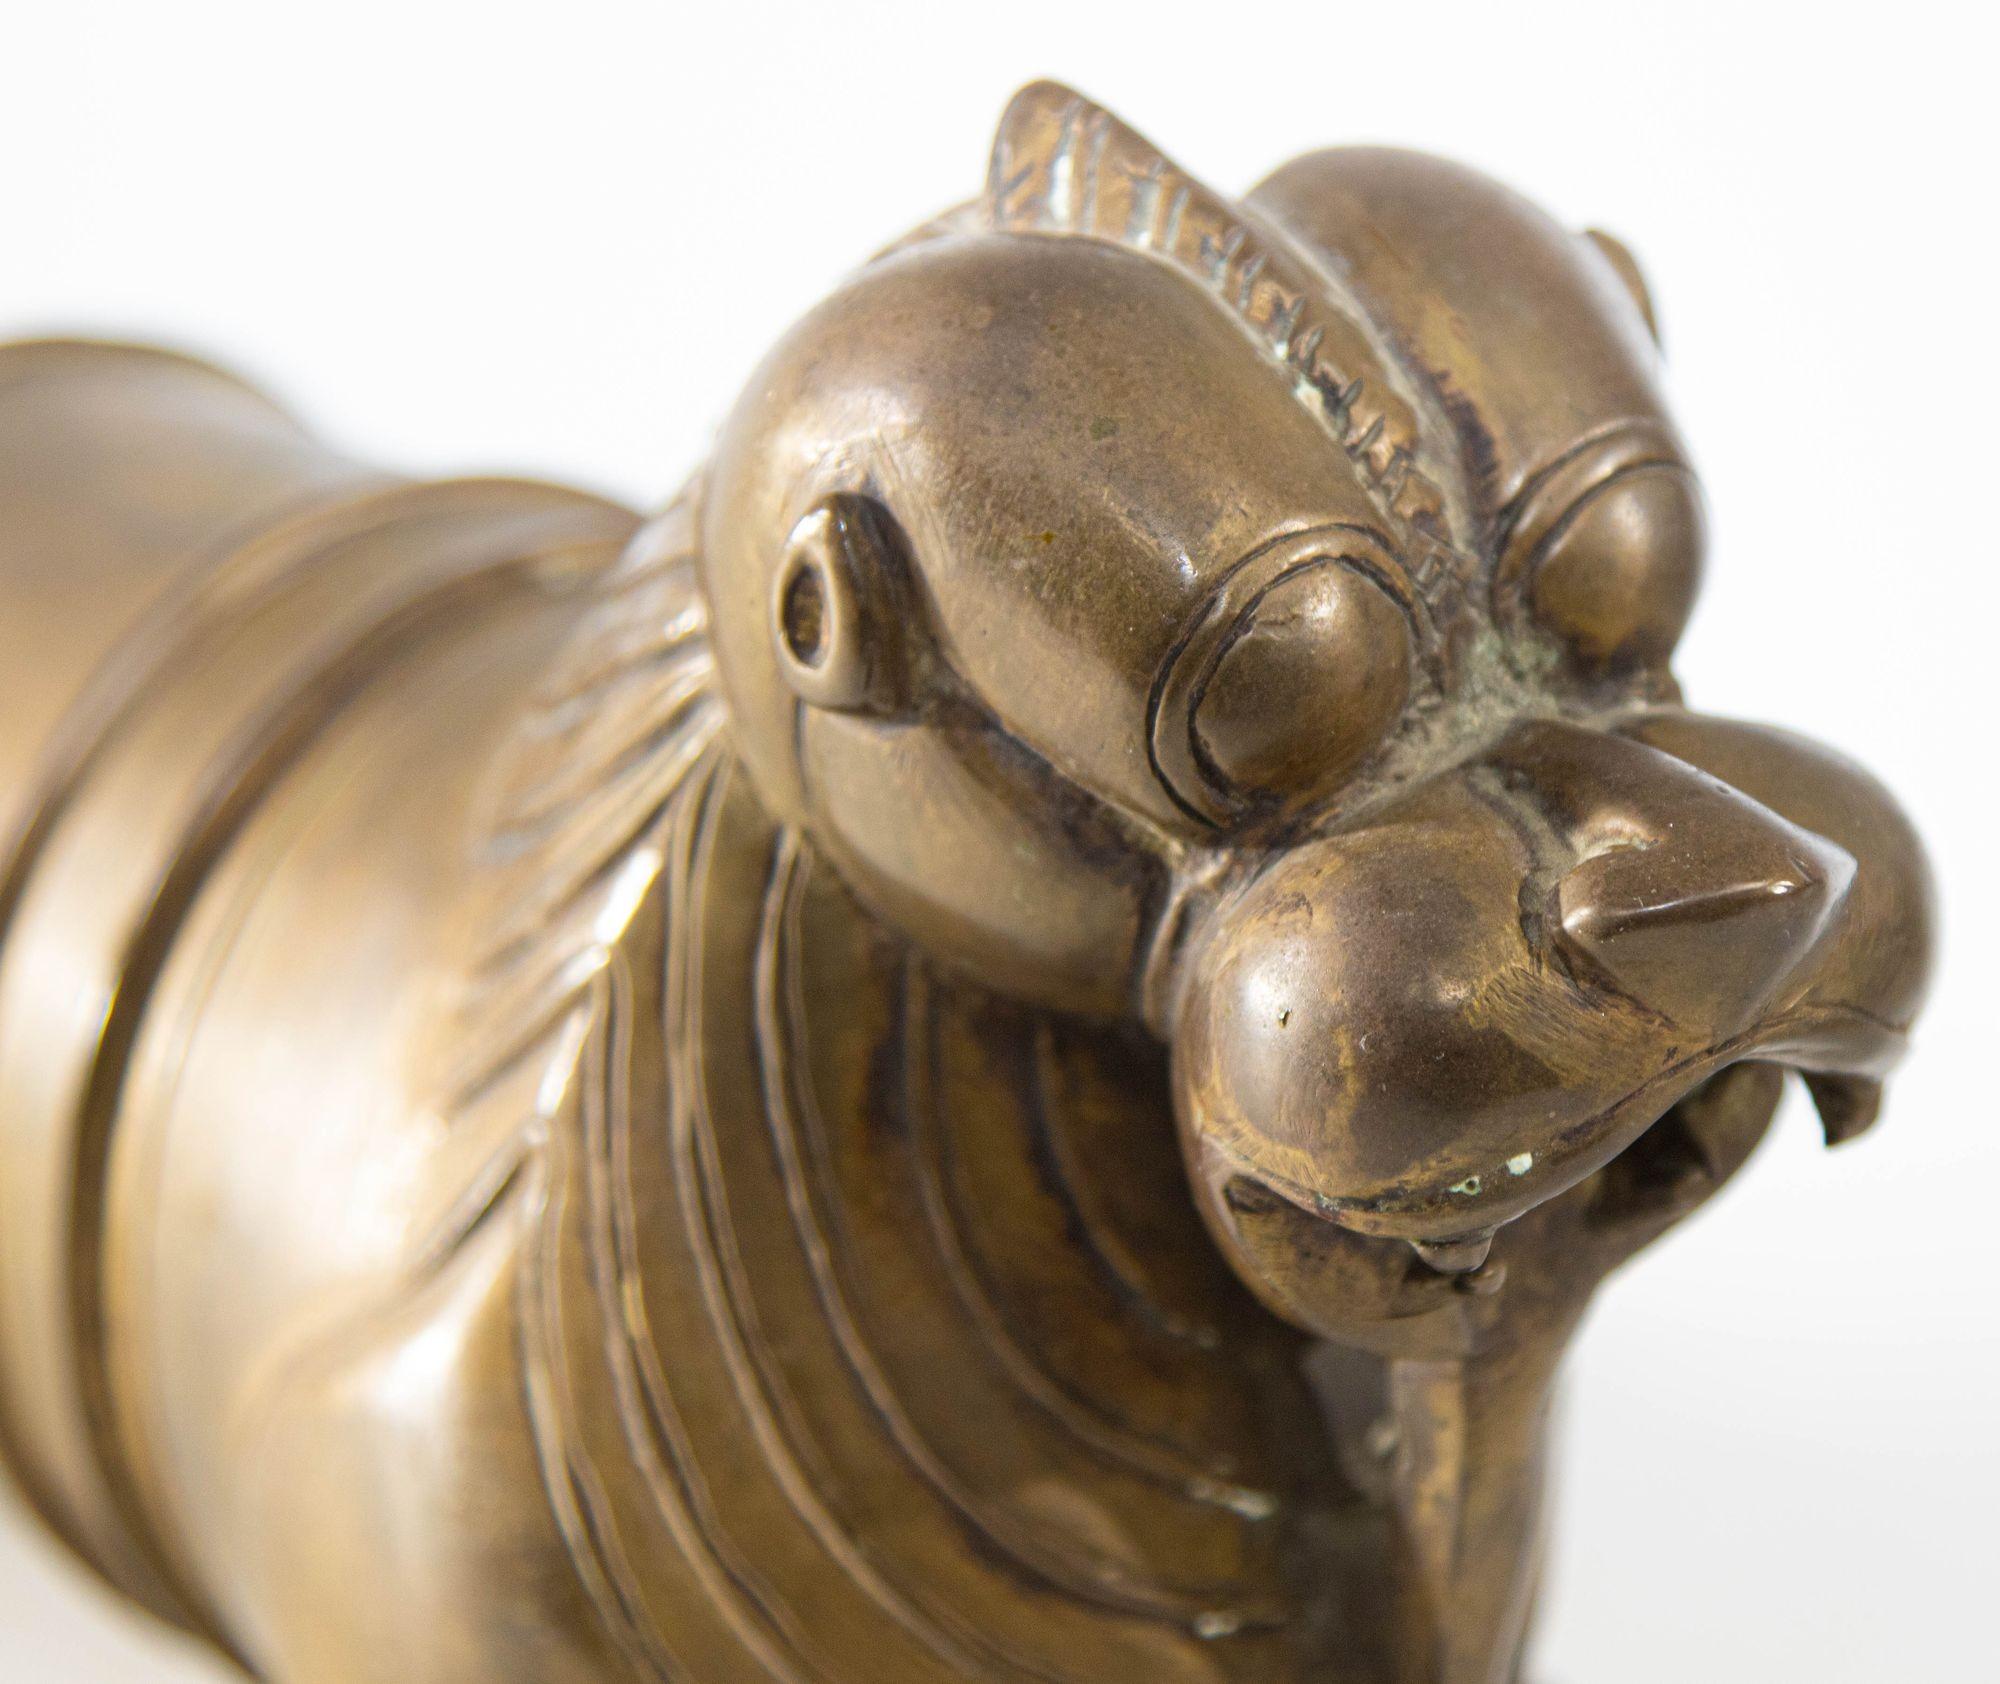 Antique Mythical Tiger Finial Bronze Palanquin Handle 18-19th Century For Sale 2